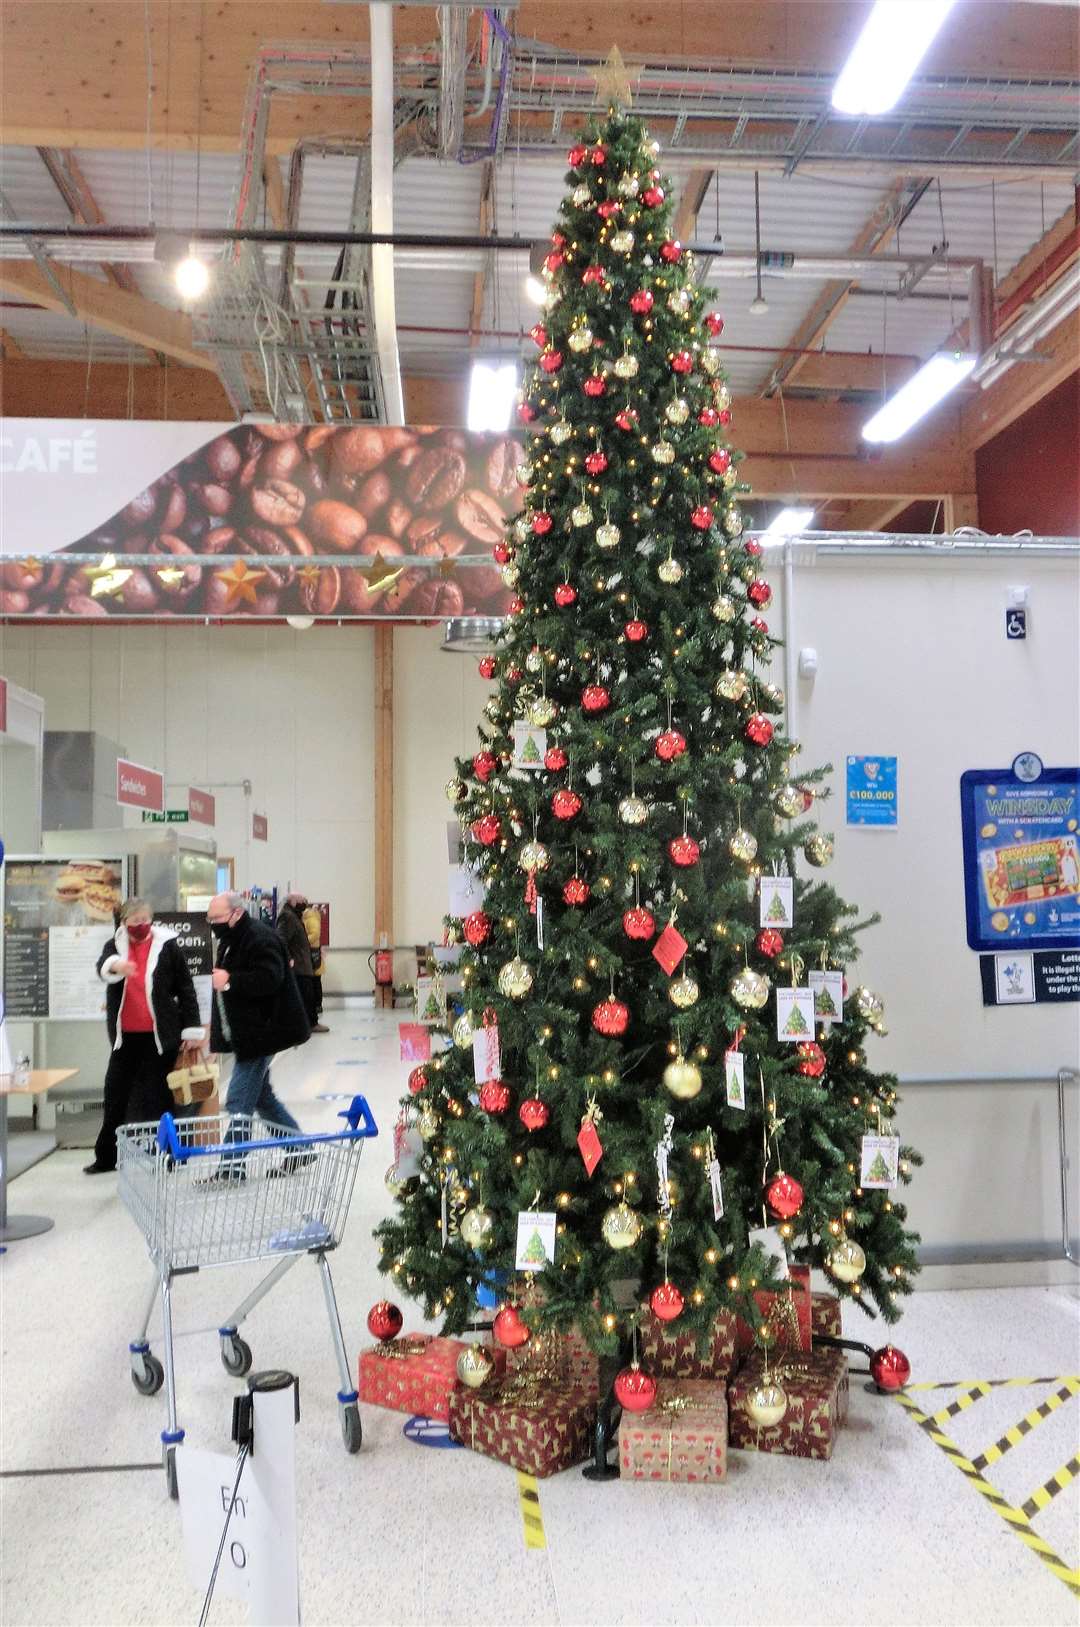 the festive 'Tree of Kindness' at the front of Wick Tesco. Pictures: DGS